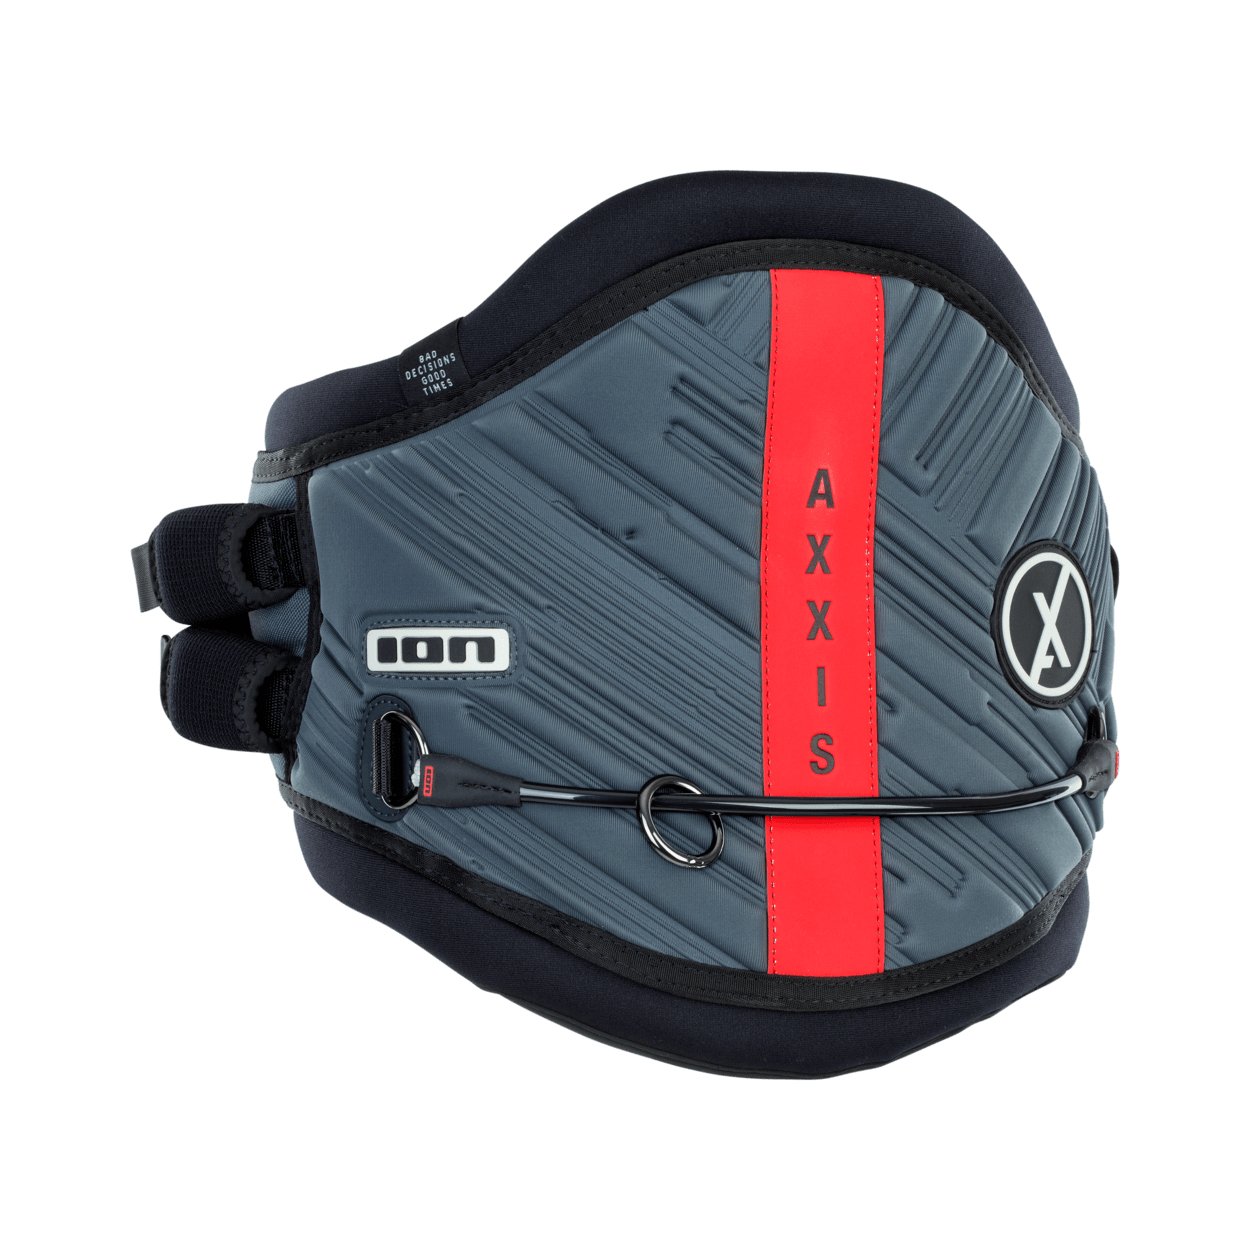 ION Axxis Kite Harness Men 2022 - Worthing Watersports - 9008415943838 - Harness - ION Water